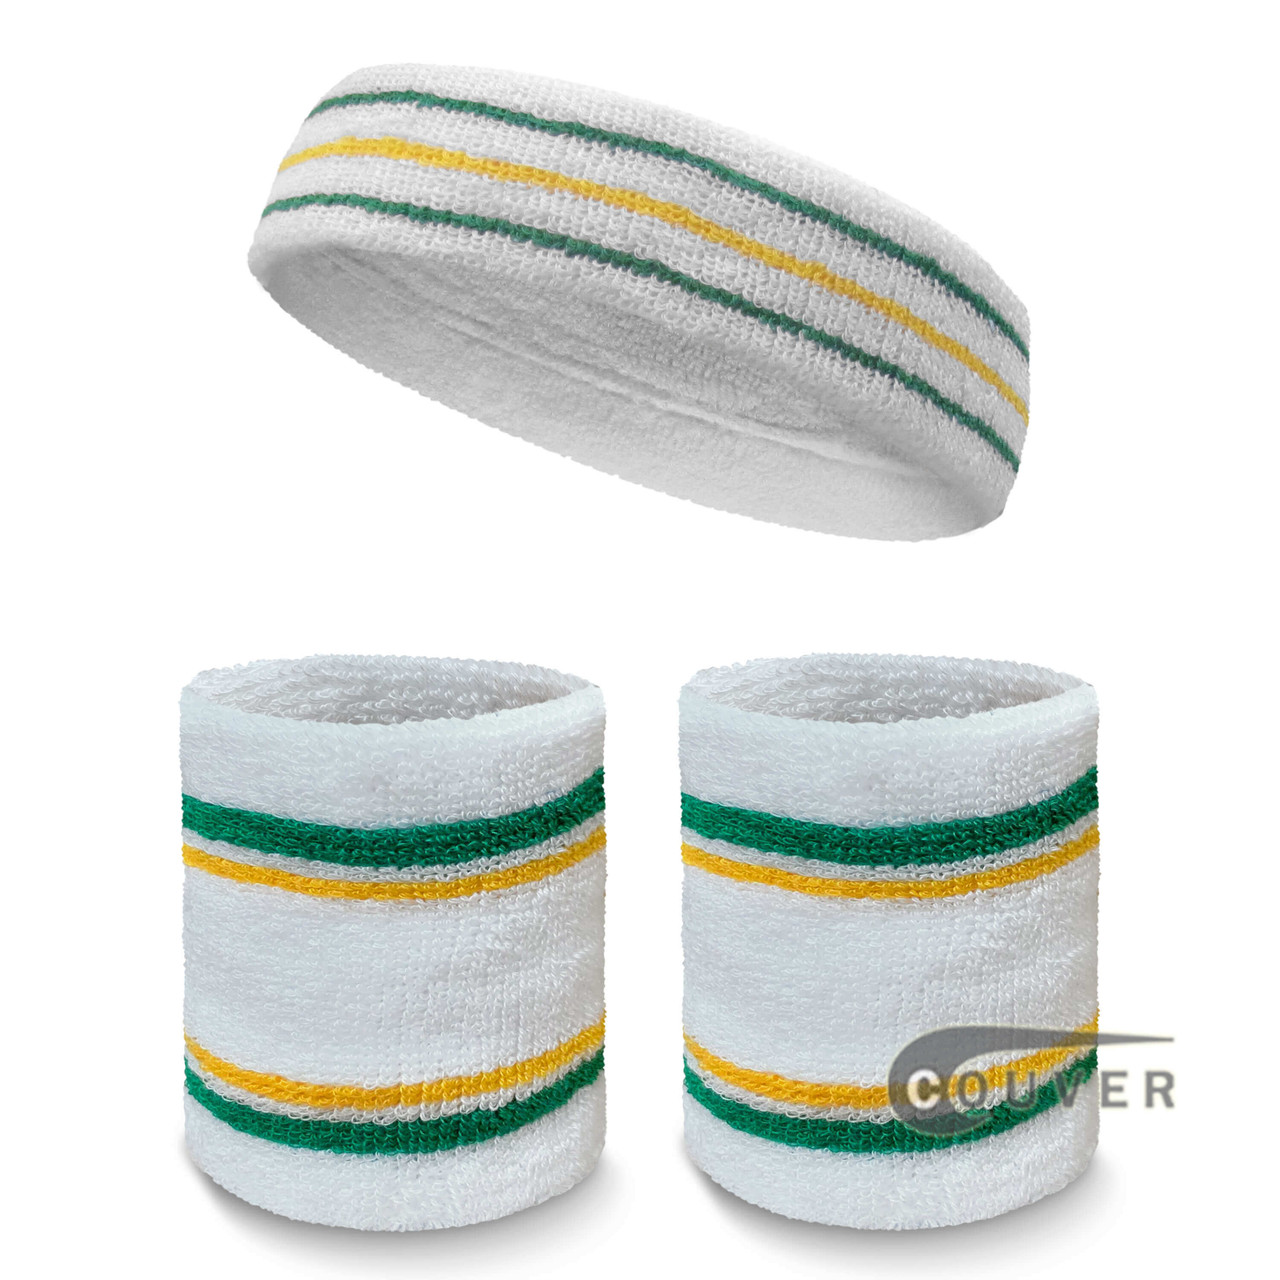 DIQC 3 Pack Sweatbands Set with Sports Headband Wristbands Soft Thickened Terry Cotton Girls Sweat Band for Gym Tennis Gymnastics Football Soccer Basketball Running Athletic Sports 